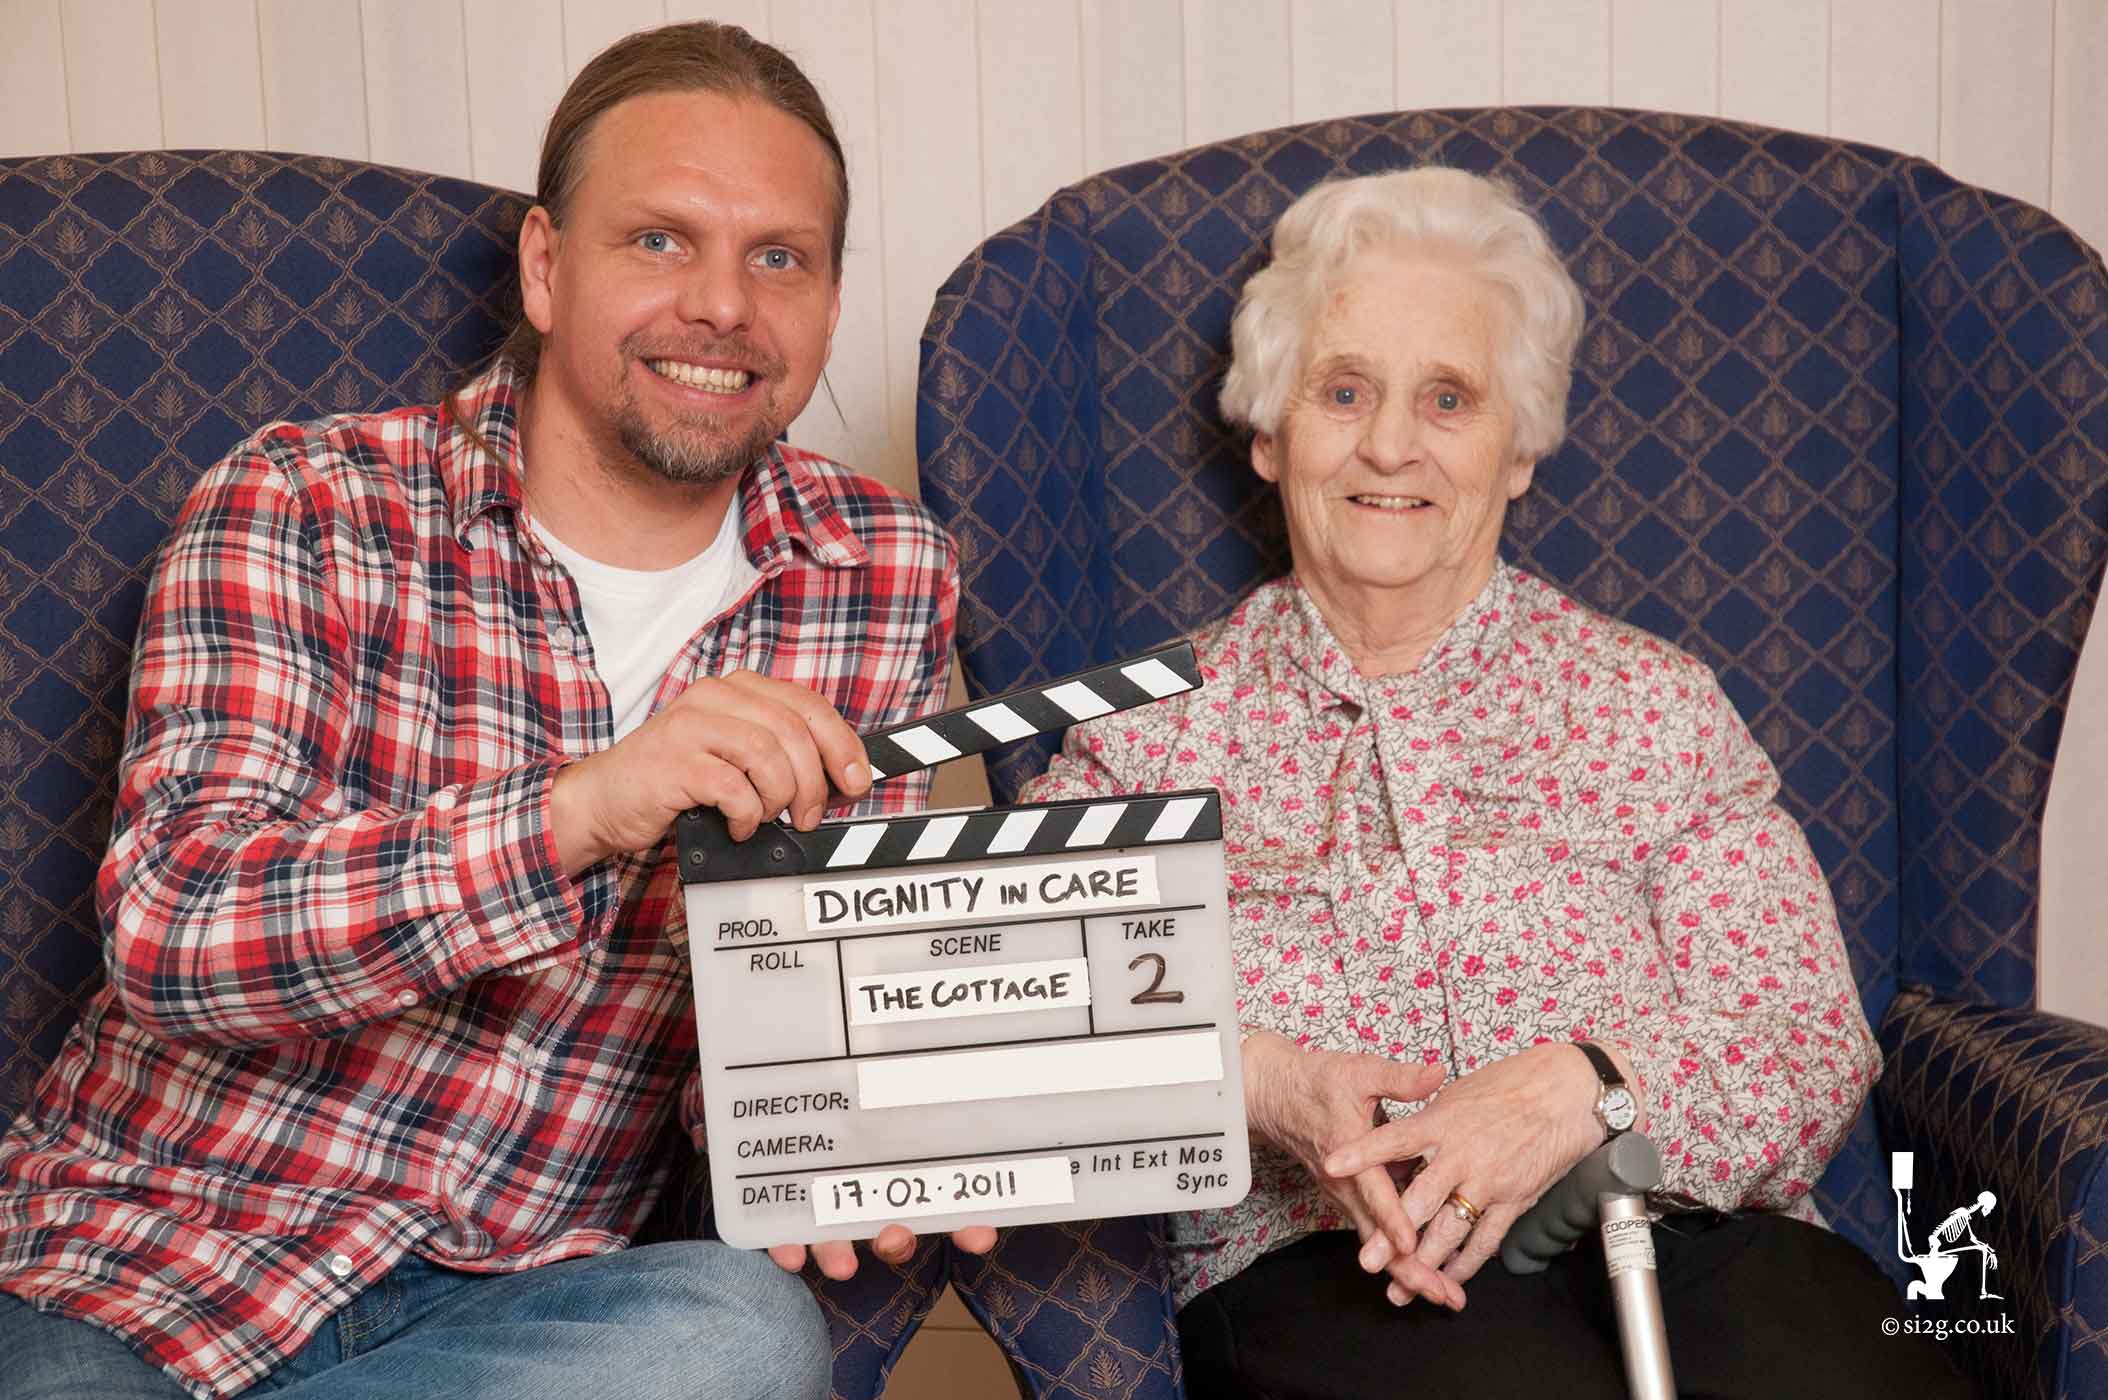 Clapper Board - Simon filming a resident of a care home.  Clapperboards are the best way of keeping your footage organised.  They are like labels for each and every shot and they are a sign that the crew have already planned what they would like to shoot.